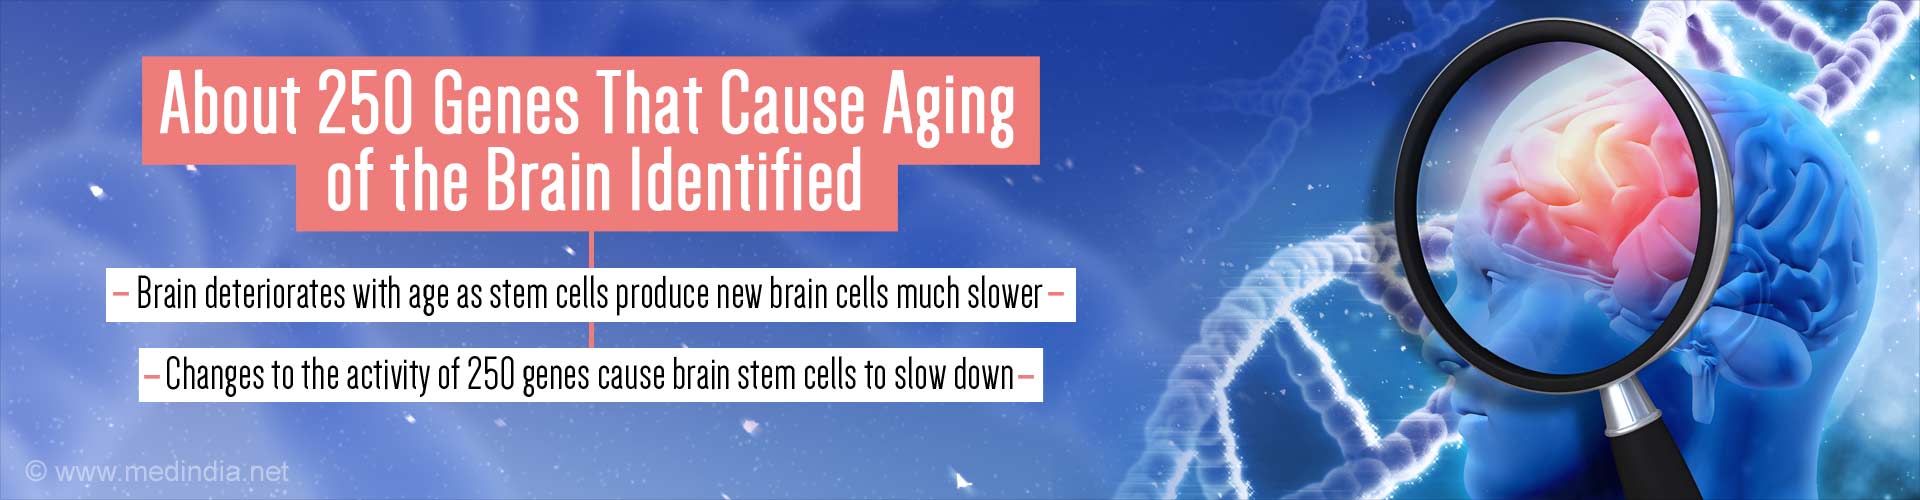 about 250 genes that cause aging of the brain identified
- brain deteriorates with age as stem cells produce new brain cells much slower
- changes to the activity of 250 genes cause brani stem cells to slow down
